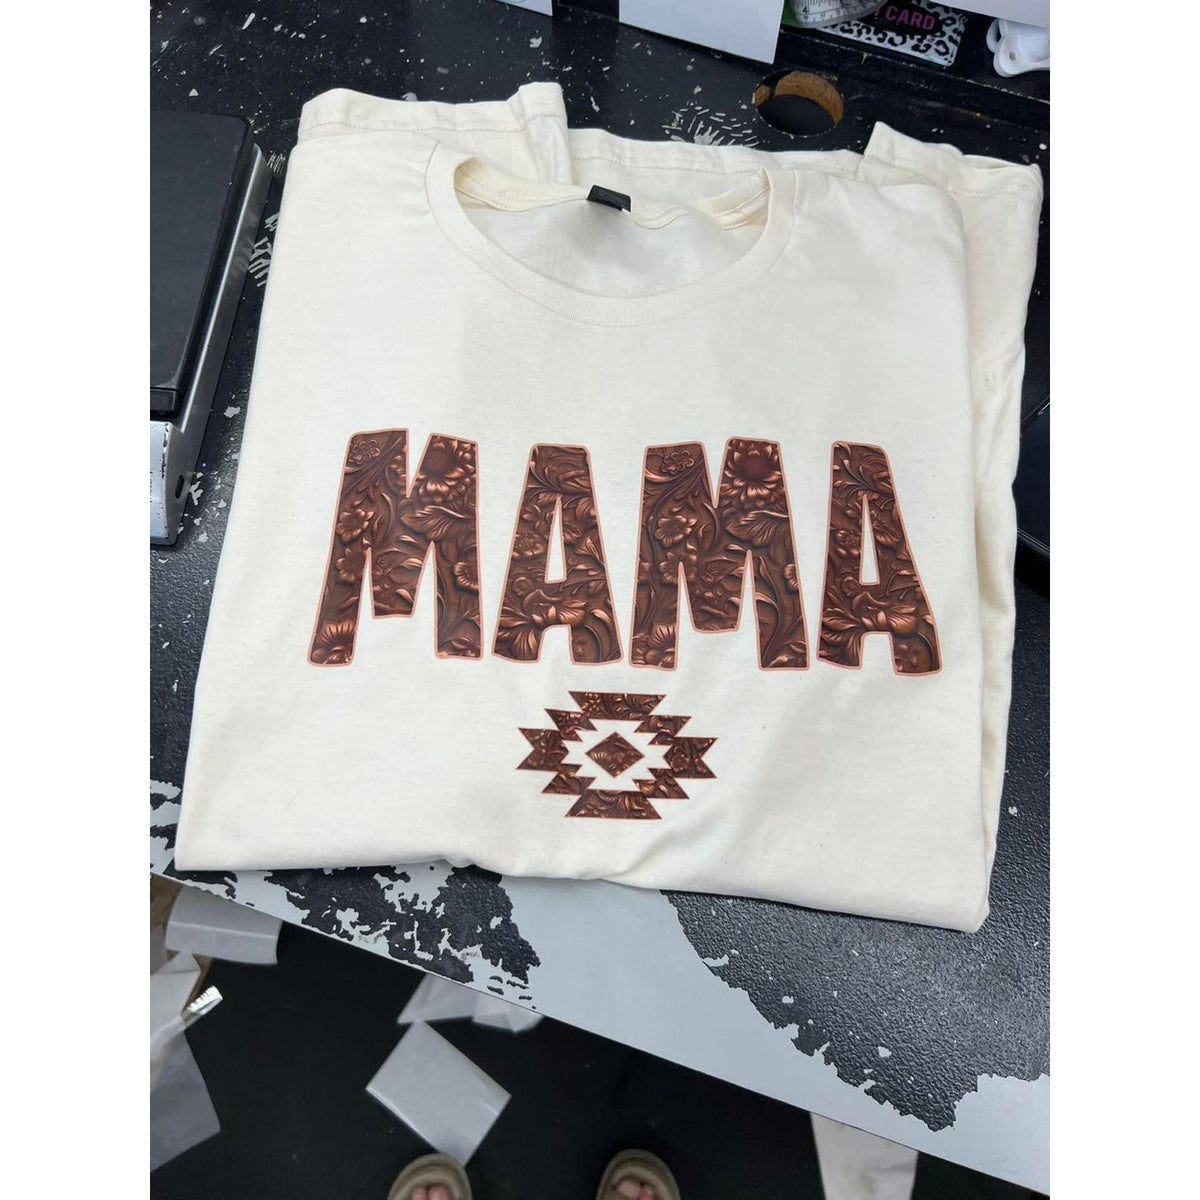 Embossed Leather faux Wife/Mana or aunt leopard tee or sweatshirt